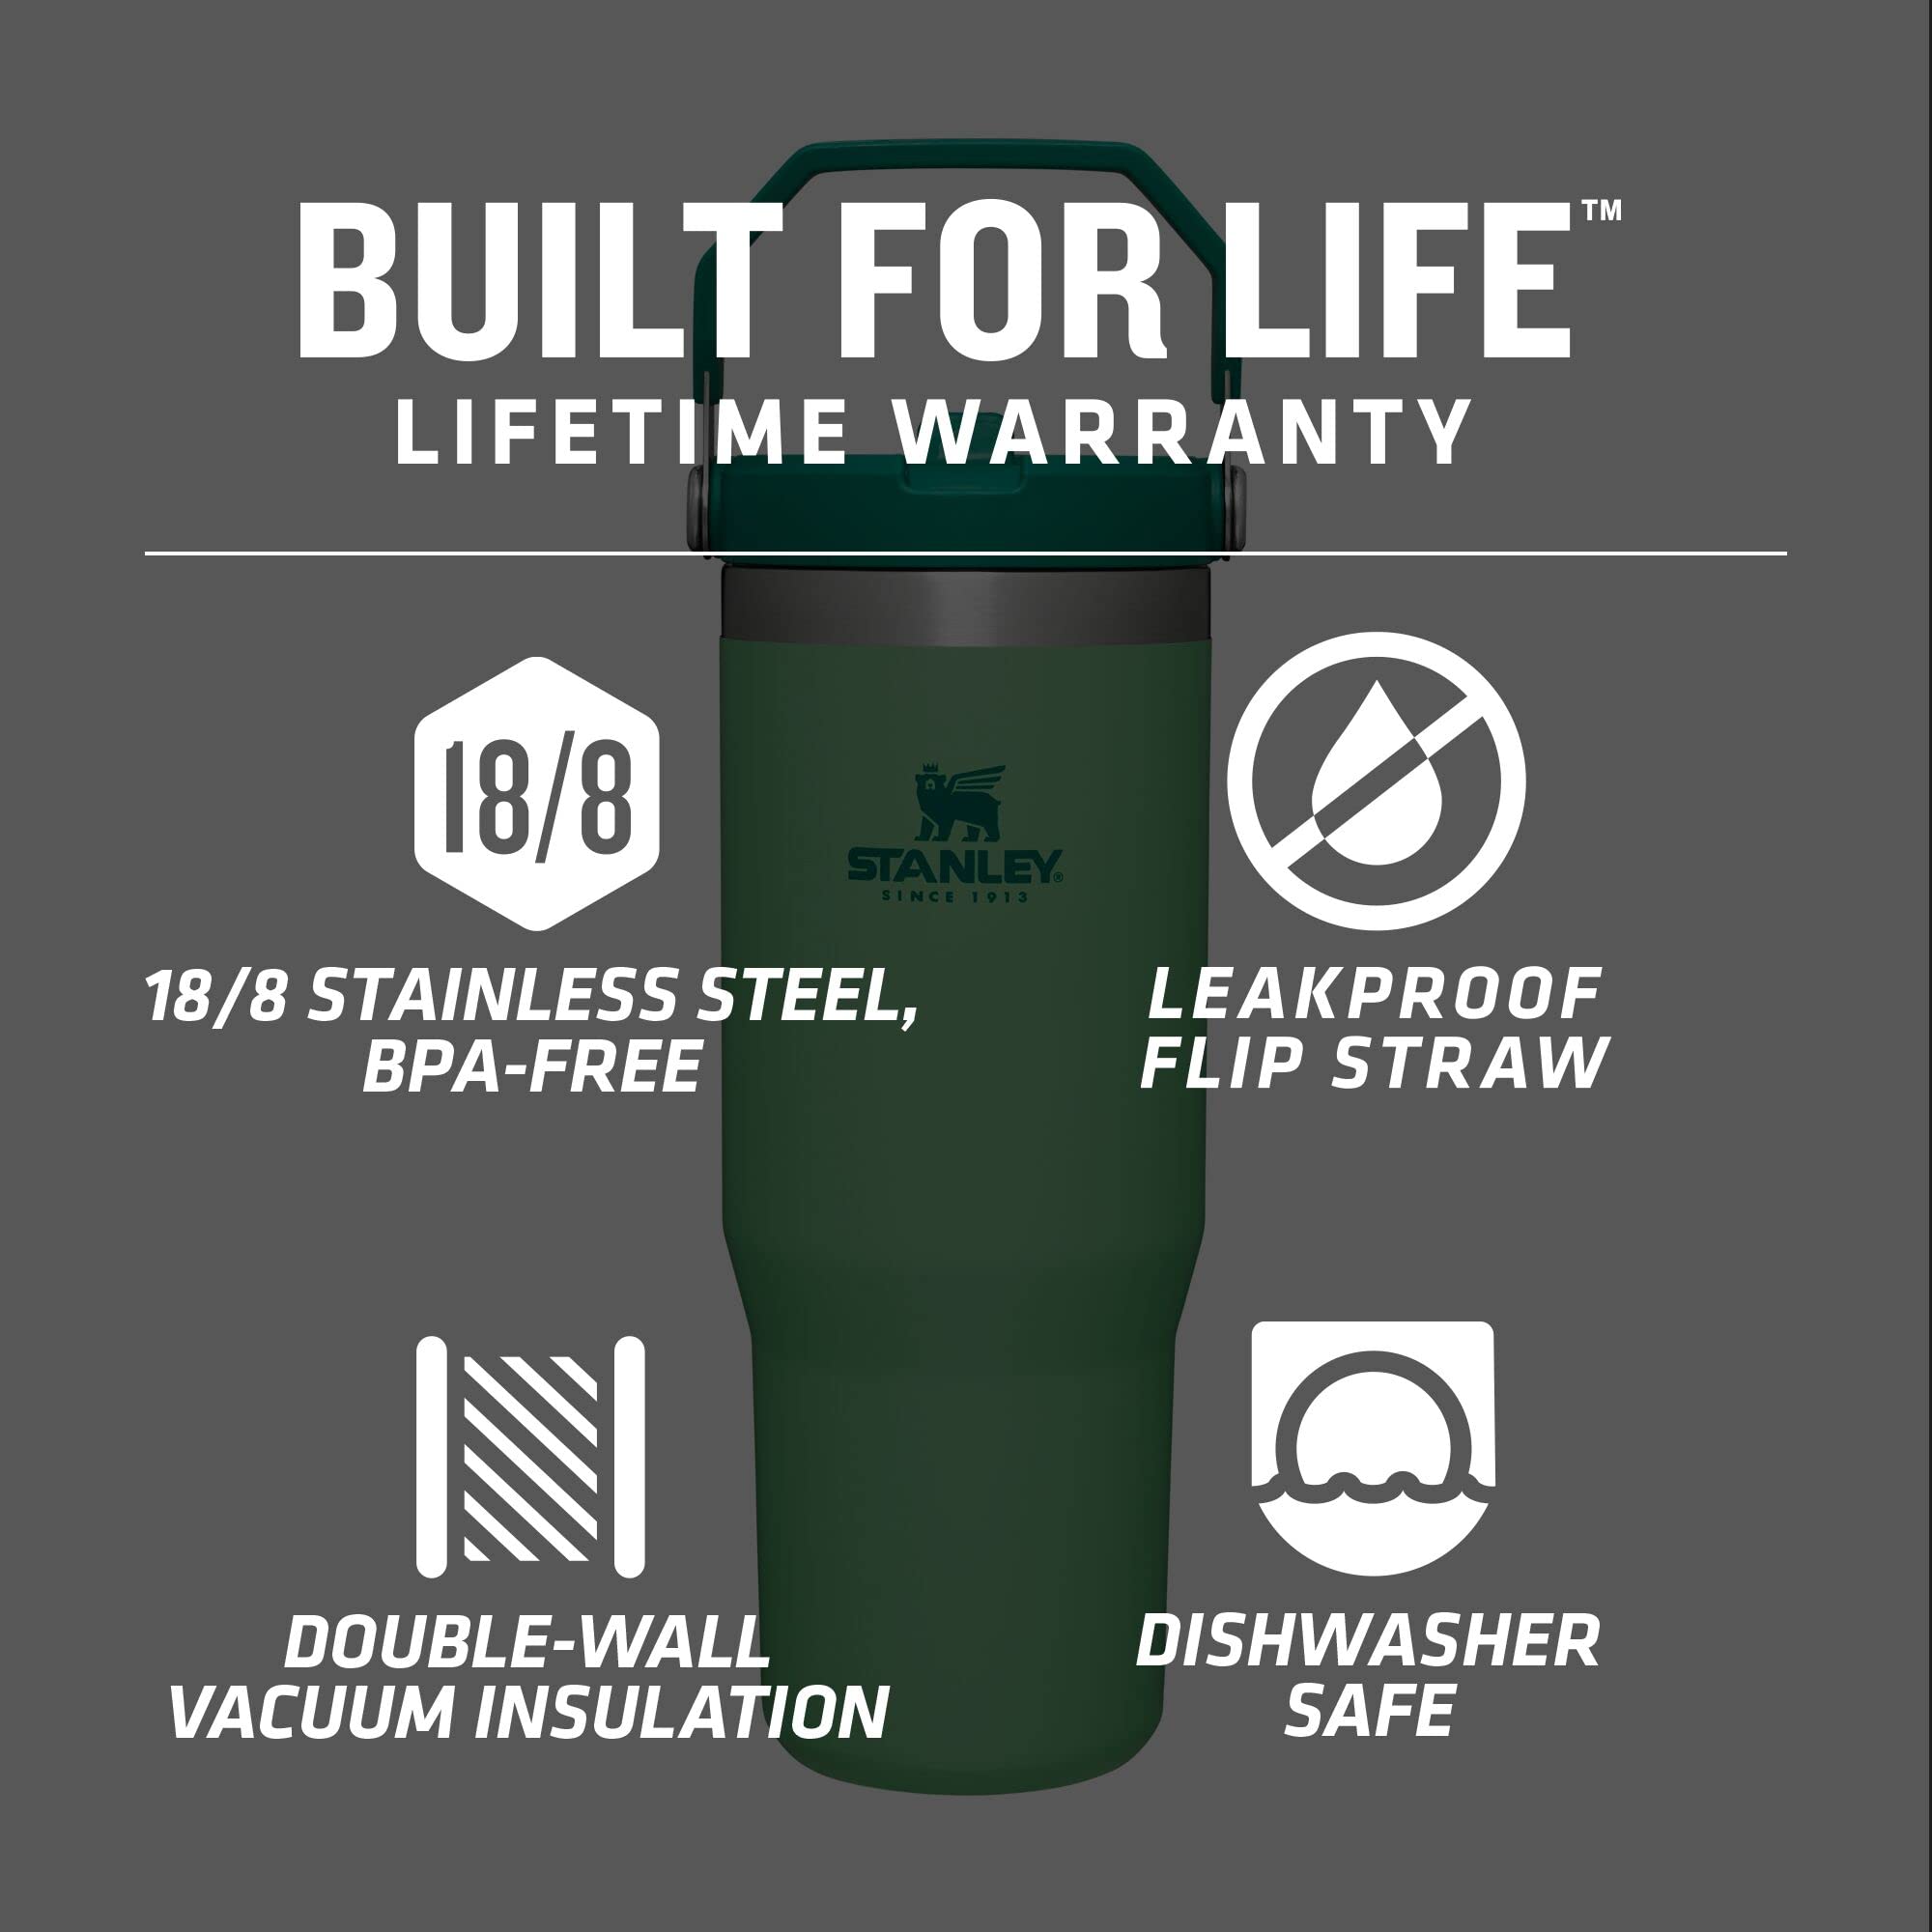 Stanley IceFlow Stainless Steel Tumbler with Straw - Vacuum Insulated Water Bottle for Home, Office or Car - Reusable Cup with Straw Leakproof Flip - Cold for 12 Hours or Iced for 2 Days (Jade)